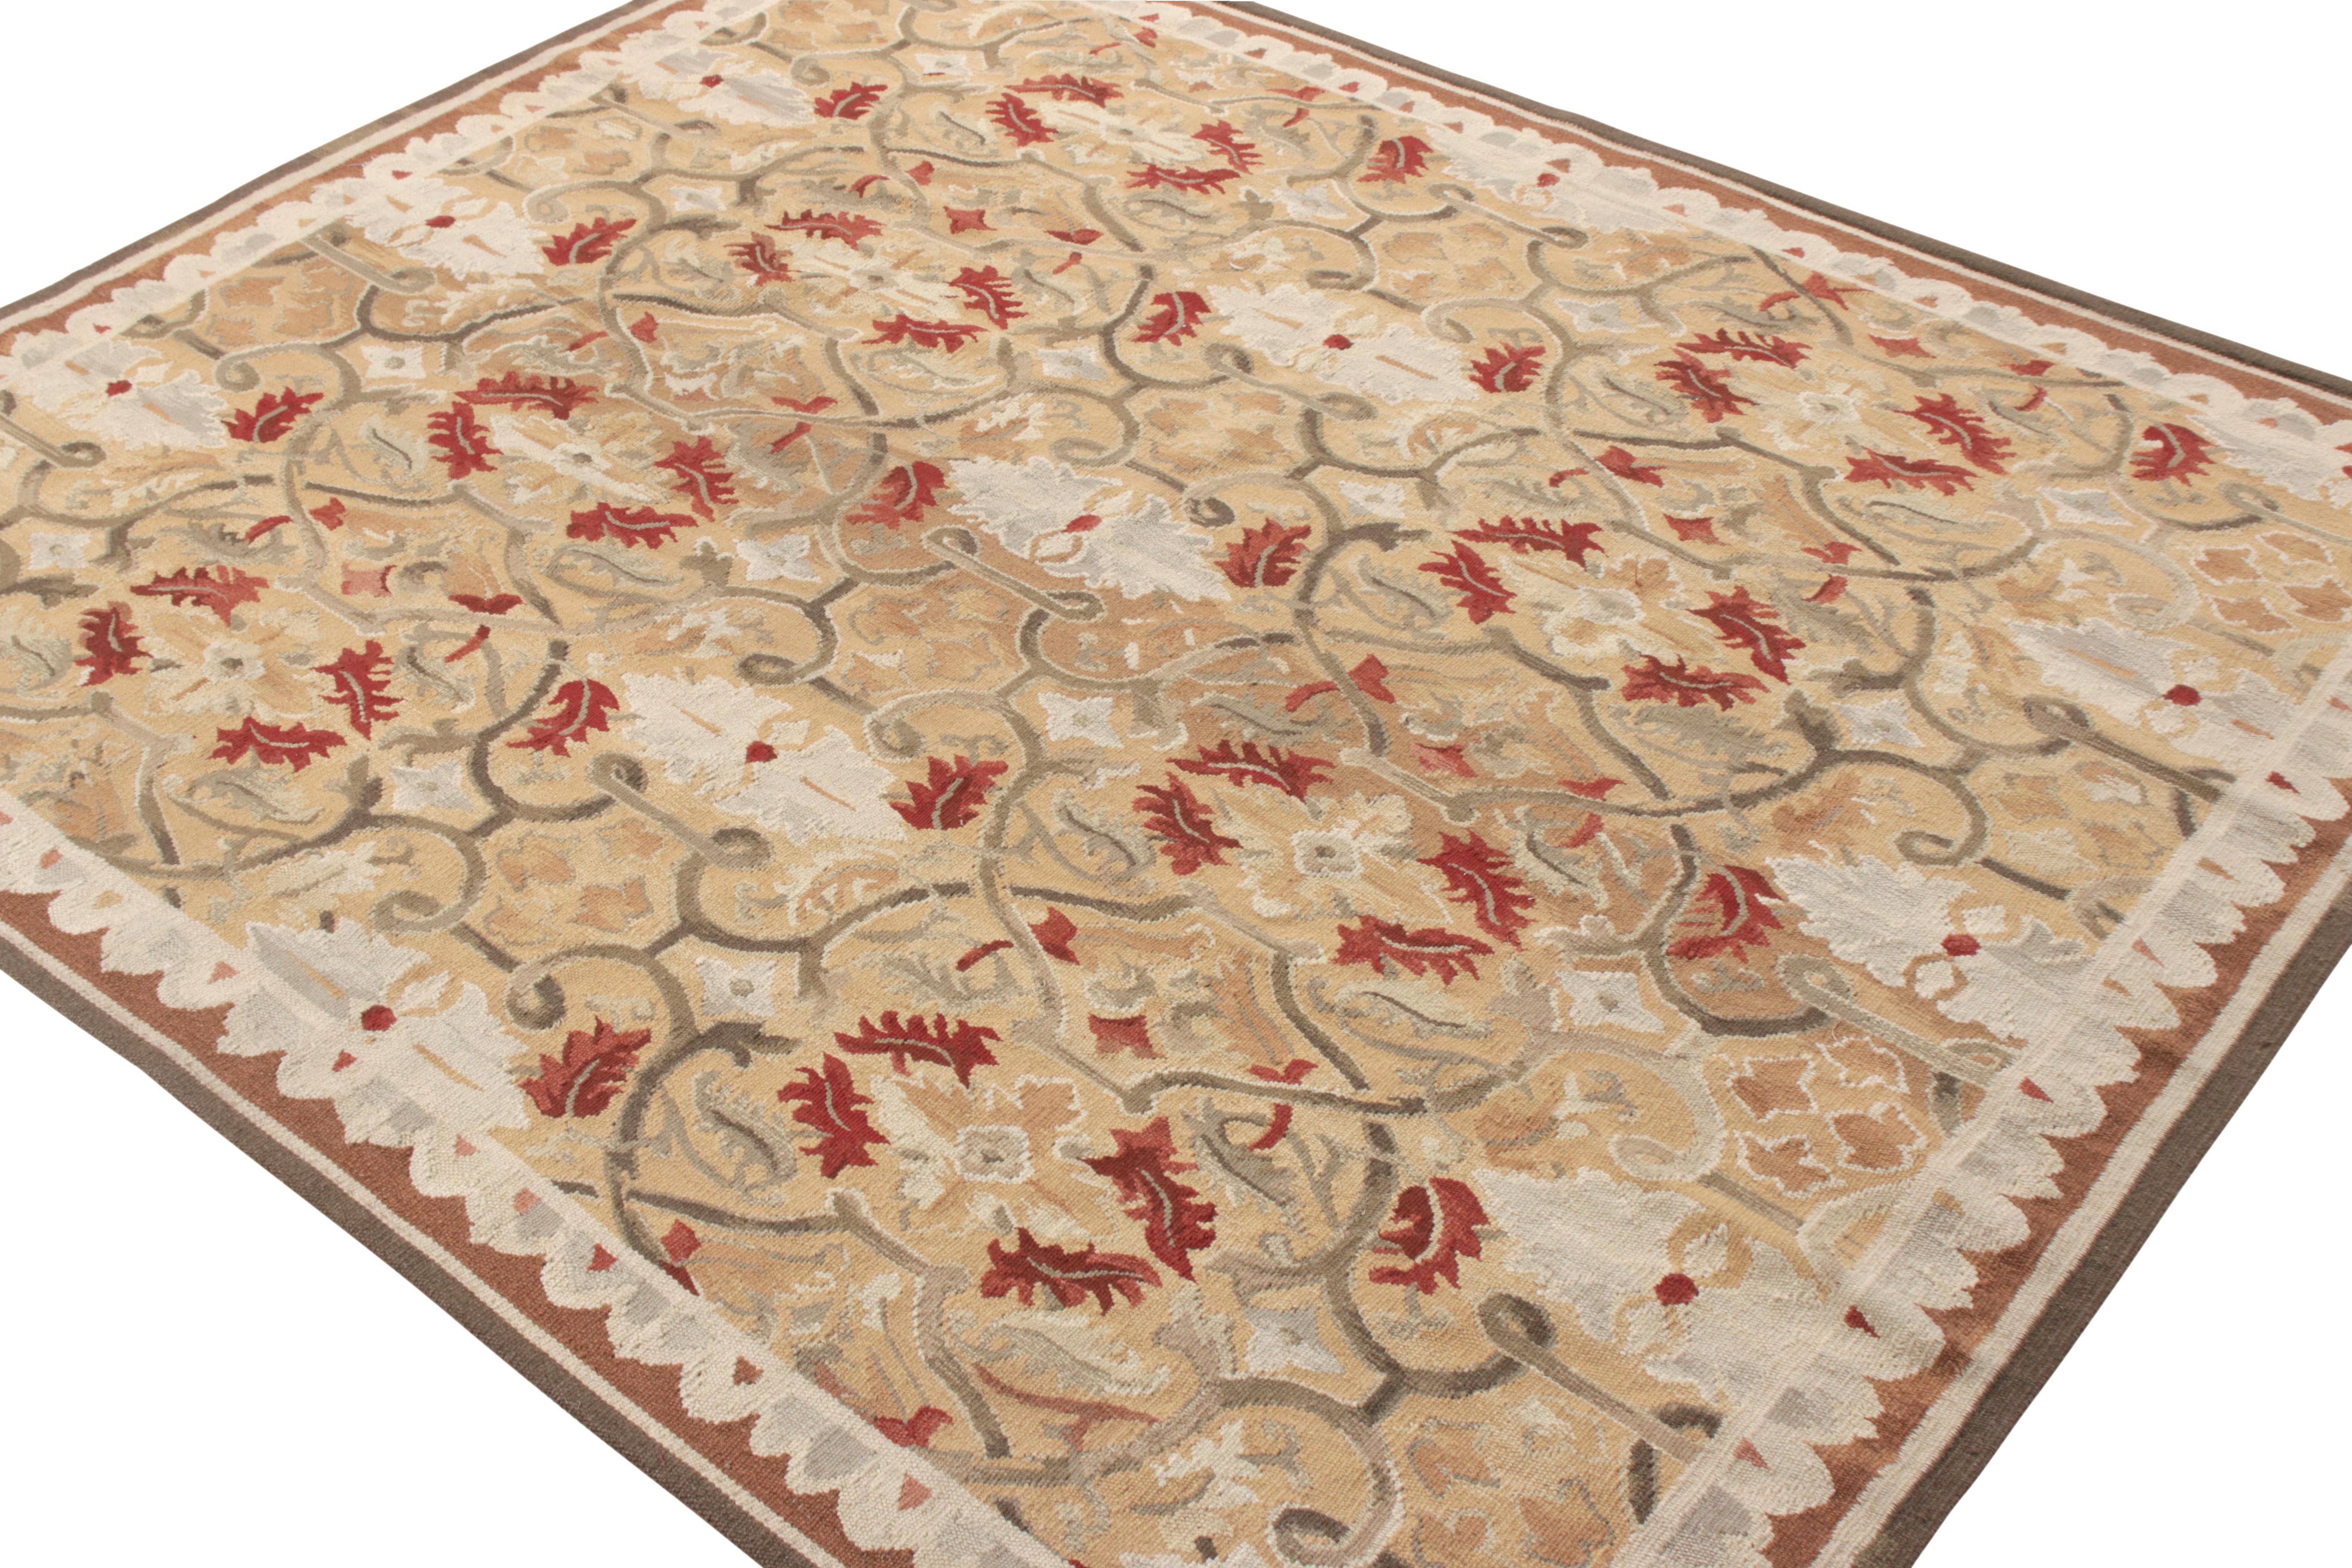 Chinois Rug & Kilim's Aubusson Flat Weave Style Rug, Beige, Gray and Red Floral Pattern (motif floral beige, gris et rouge) en vente